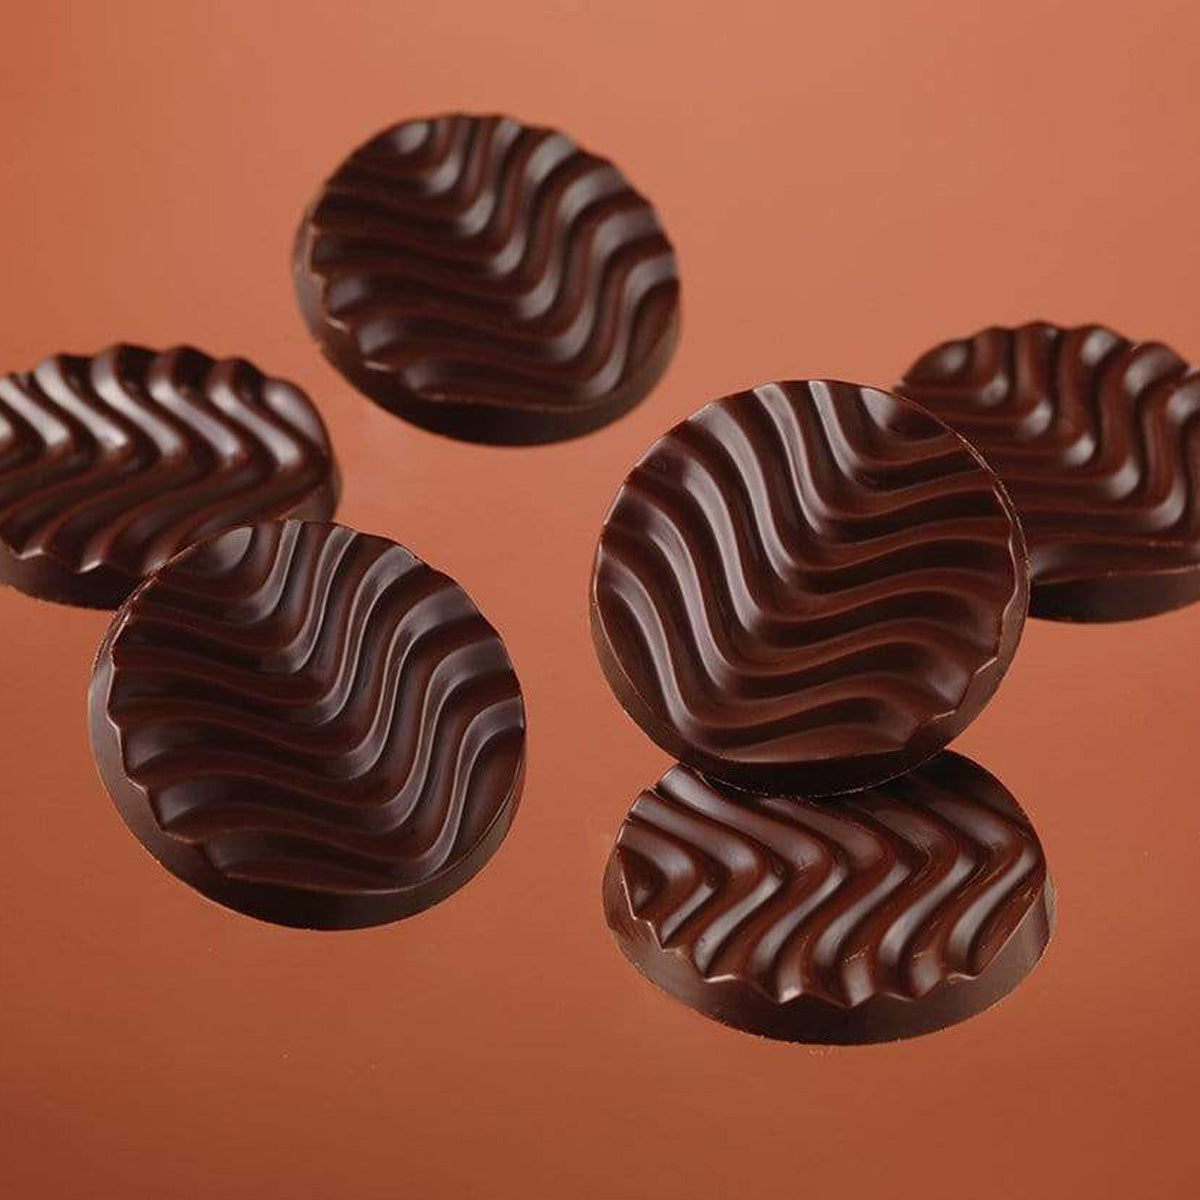 ROYCE' Chocolate - Pure Chocolate "Venezuela Bitter & Ghana Sweet" - Image shows dark brown chocolate discs with a waved texture. Background is in burgundy color.